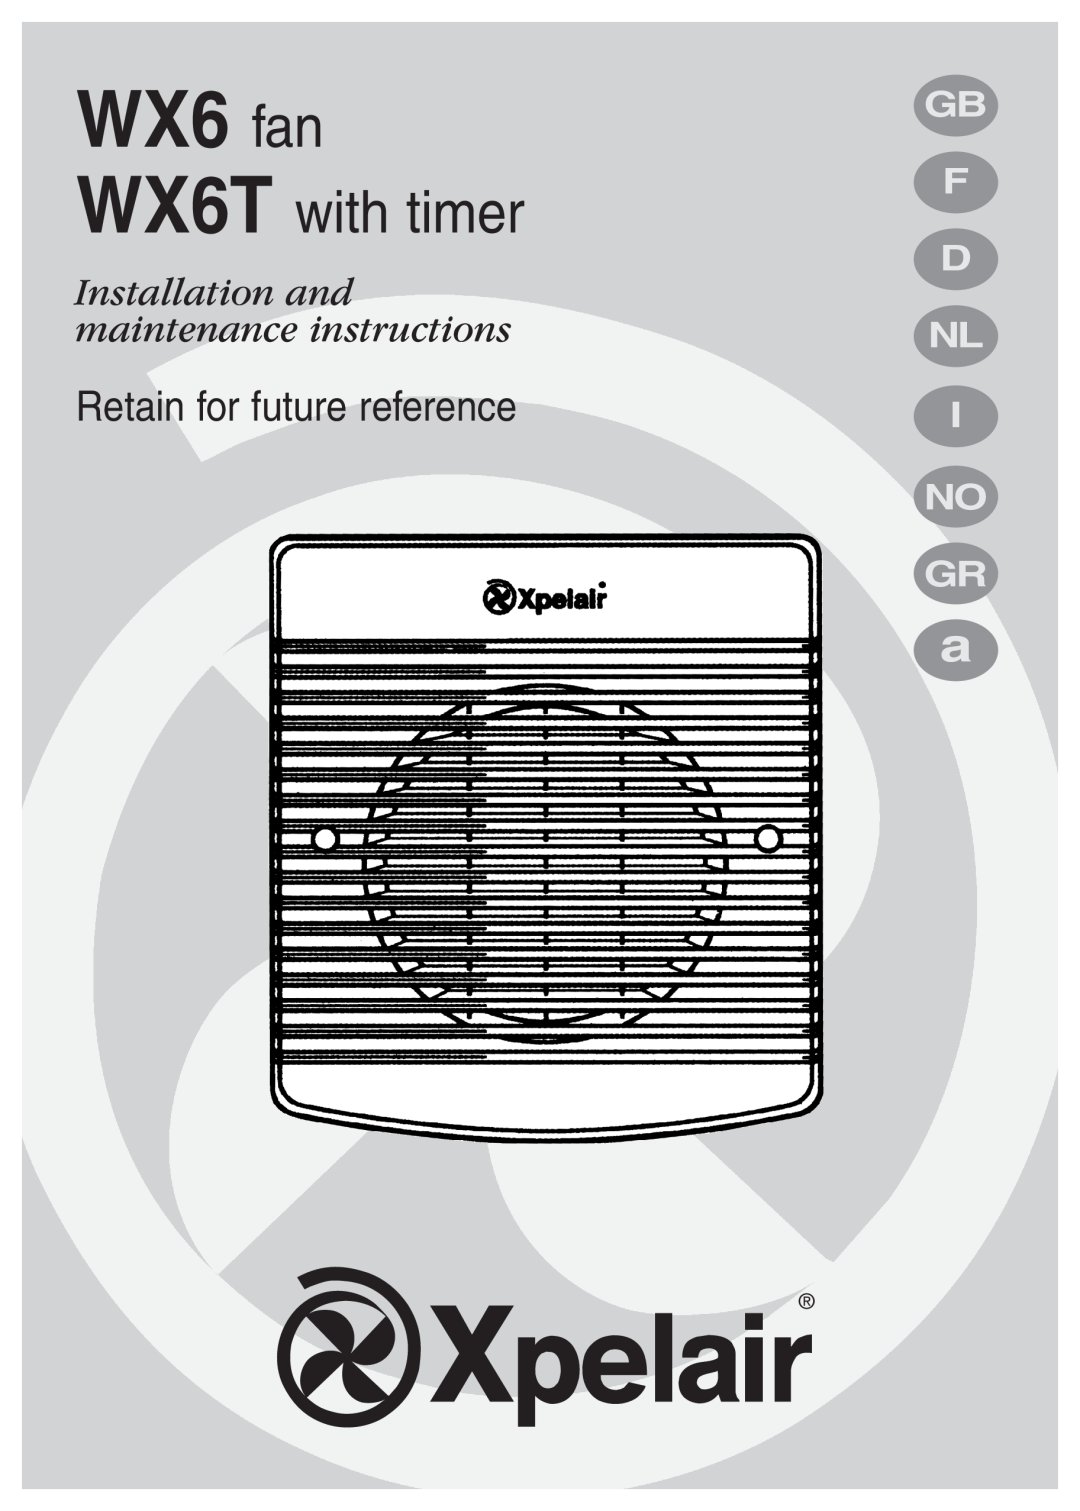 Xpelair manual Gb F, WX6 fan, WX6T with timer, Retain for future reference, Installation and, maintenance instructions 